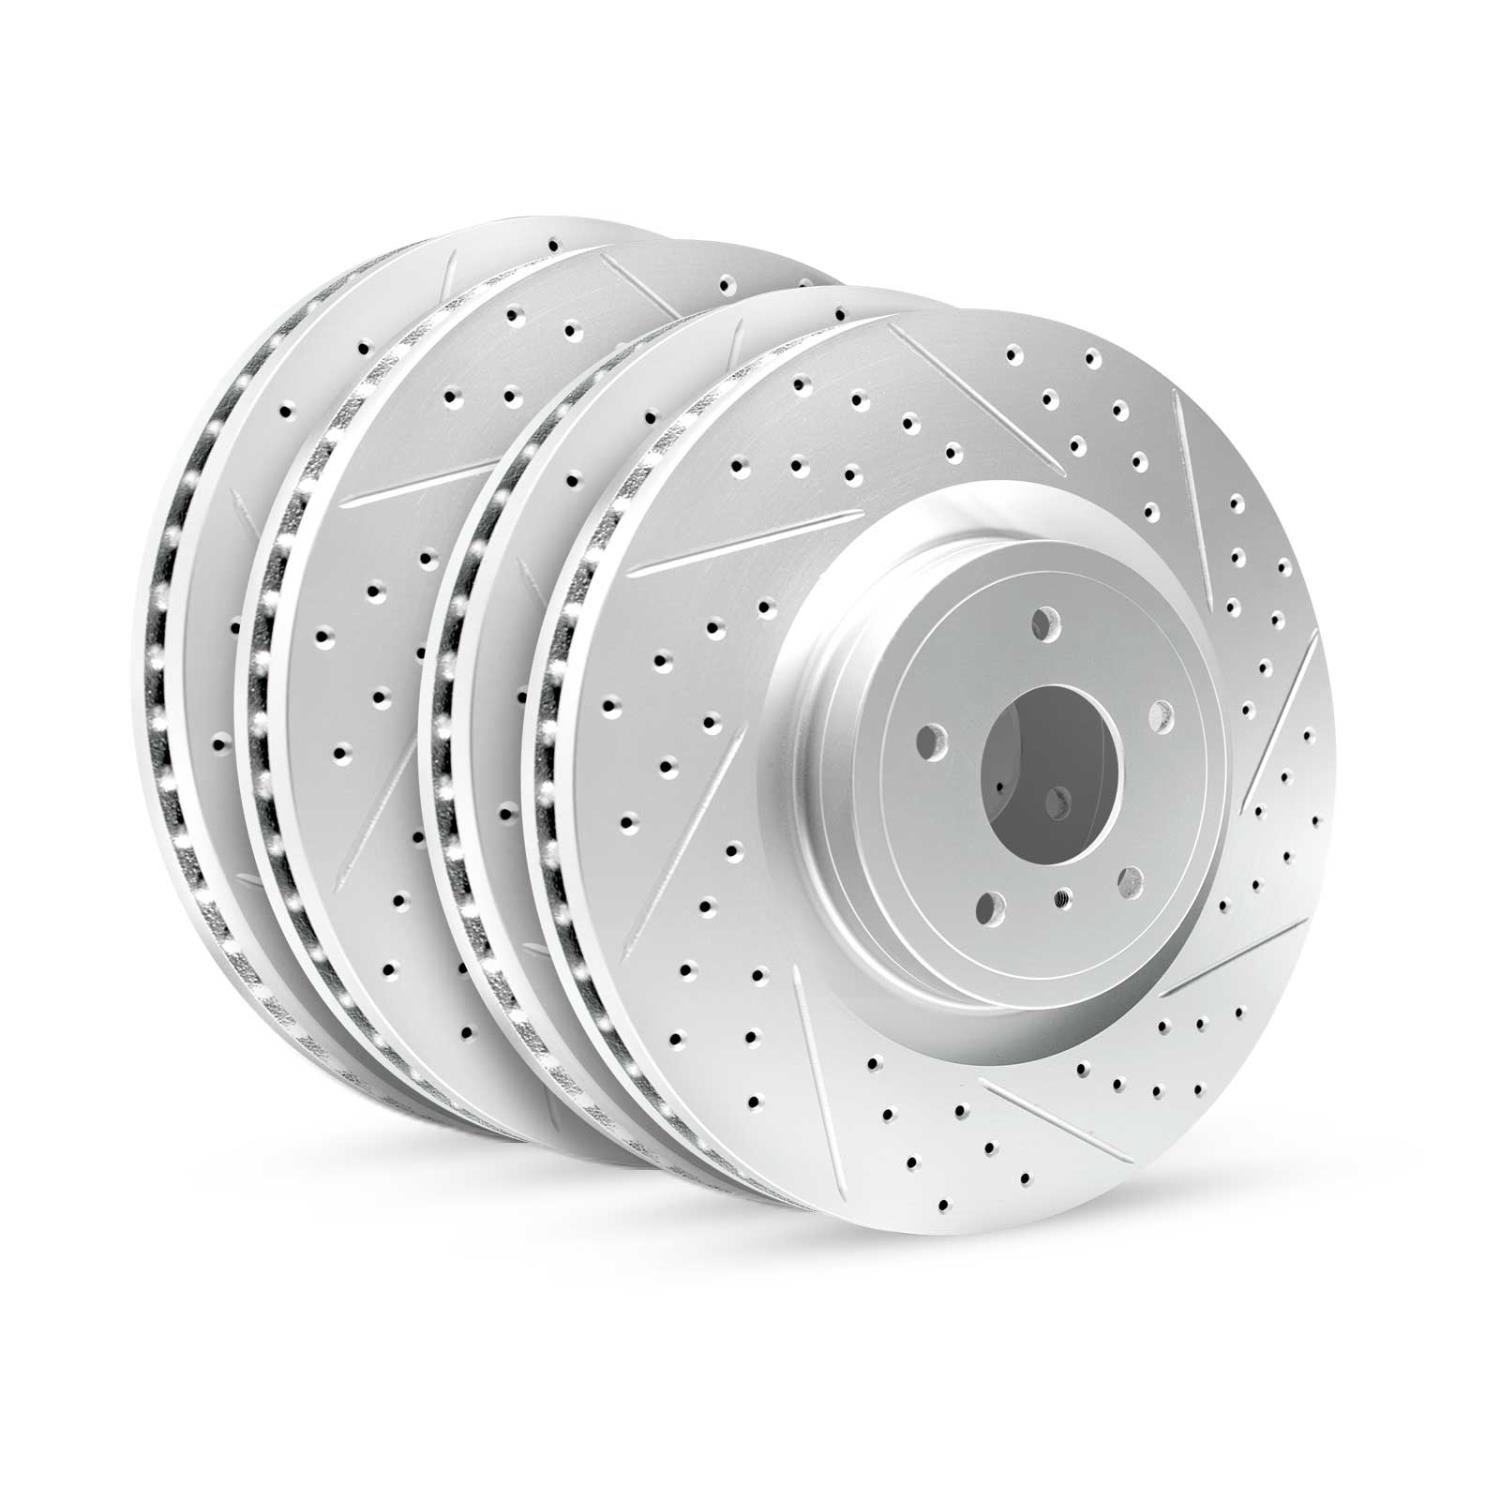 GEO-Carbon Drilled/Slotted Rotors, 1990-2003 Ford/Mazda,